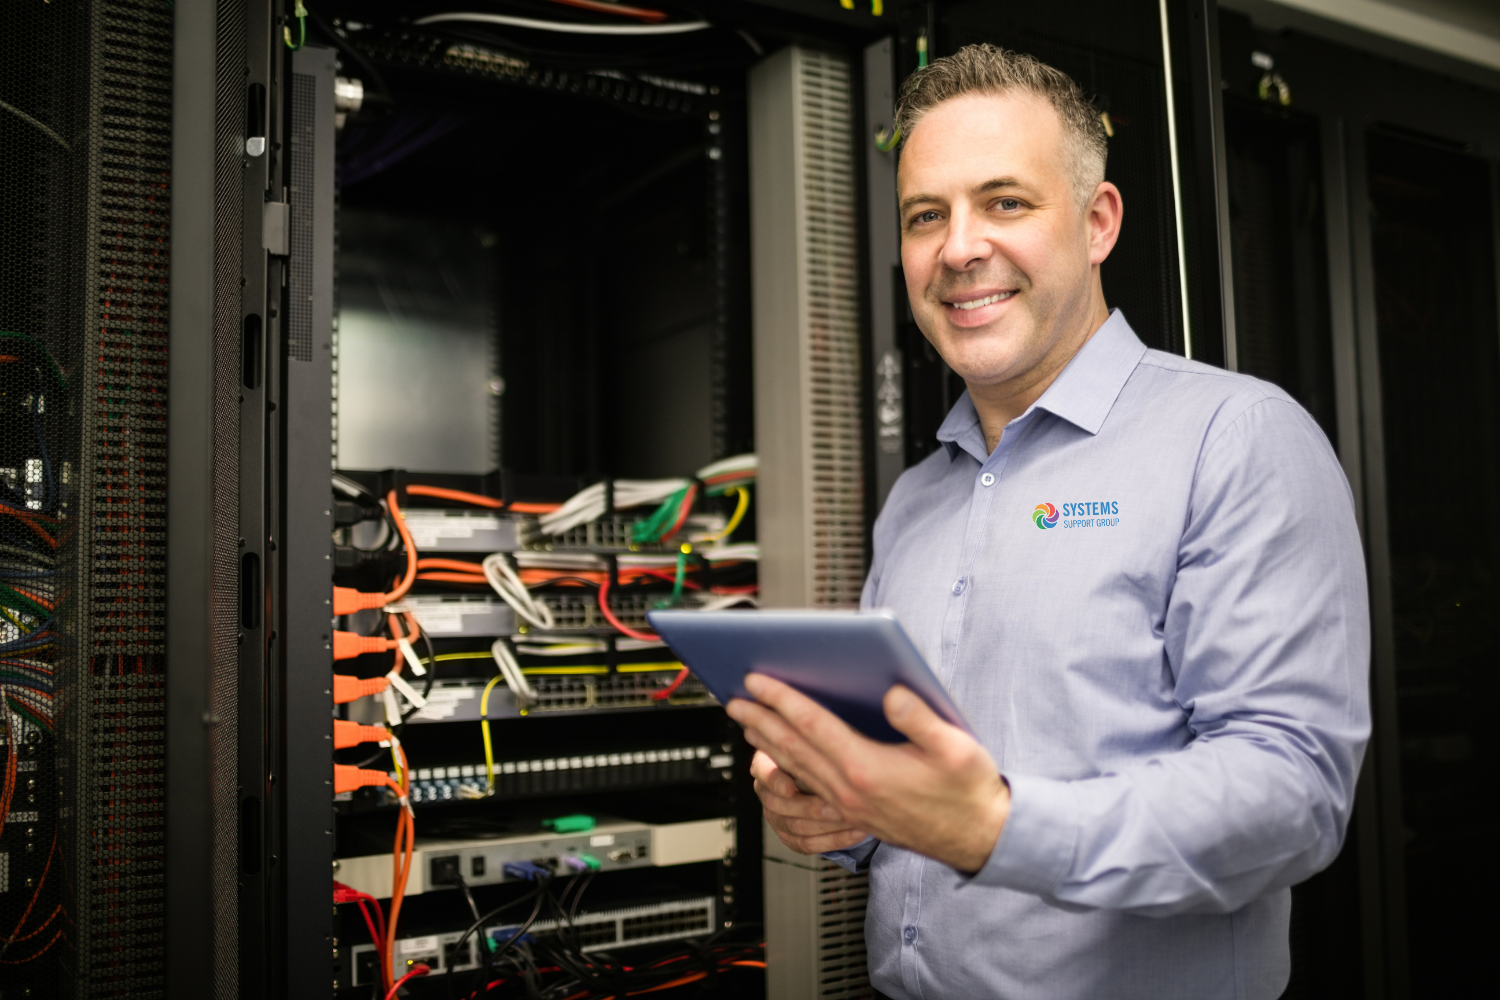 A man smiling with a tablet in hand in front of server racks.